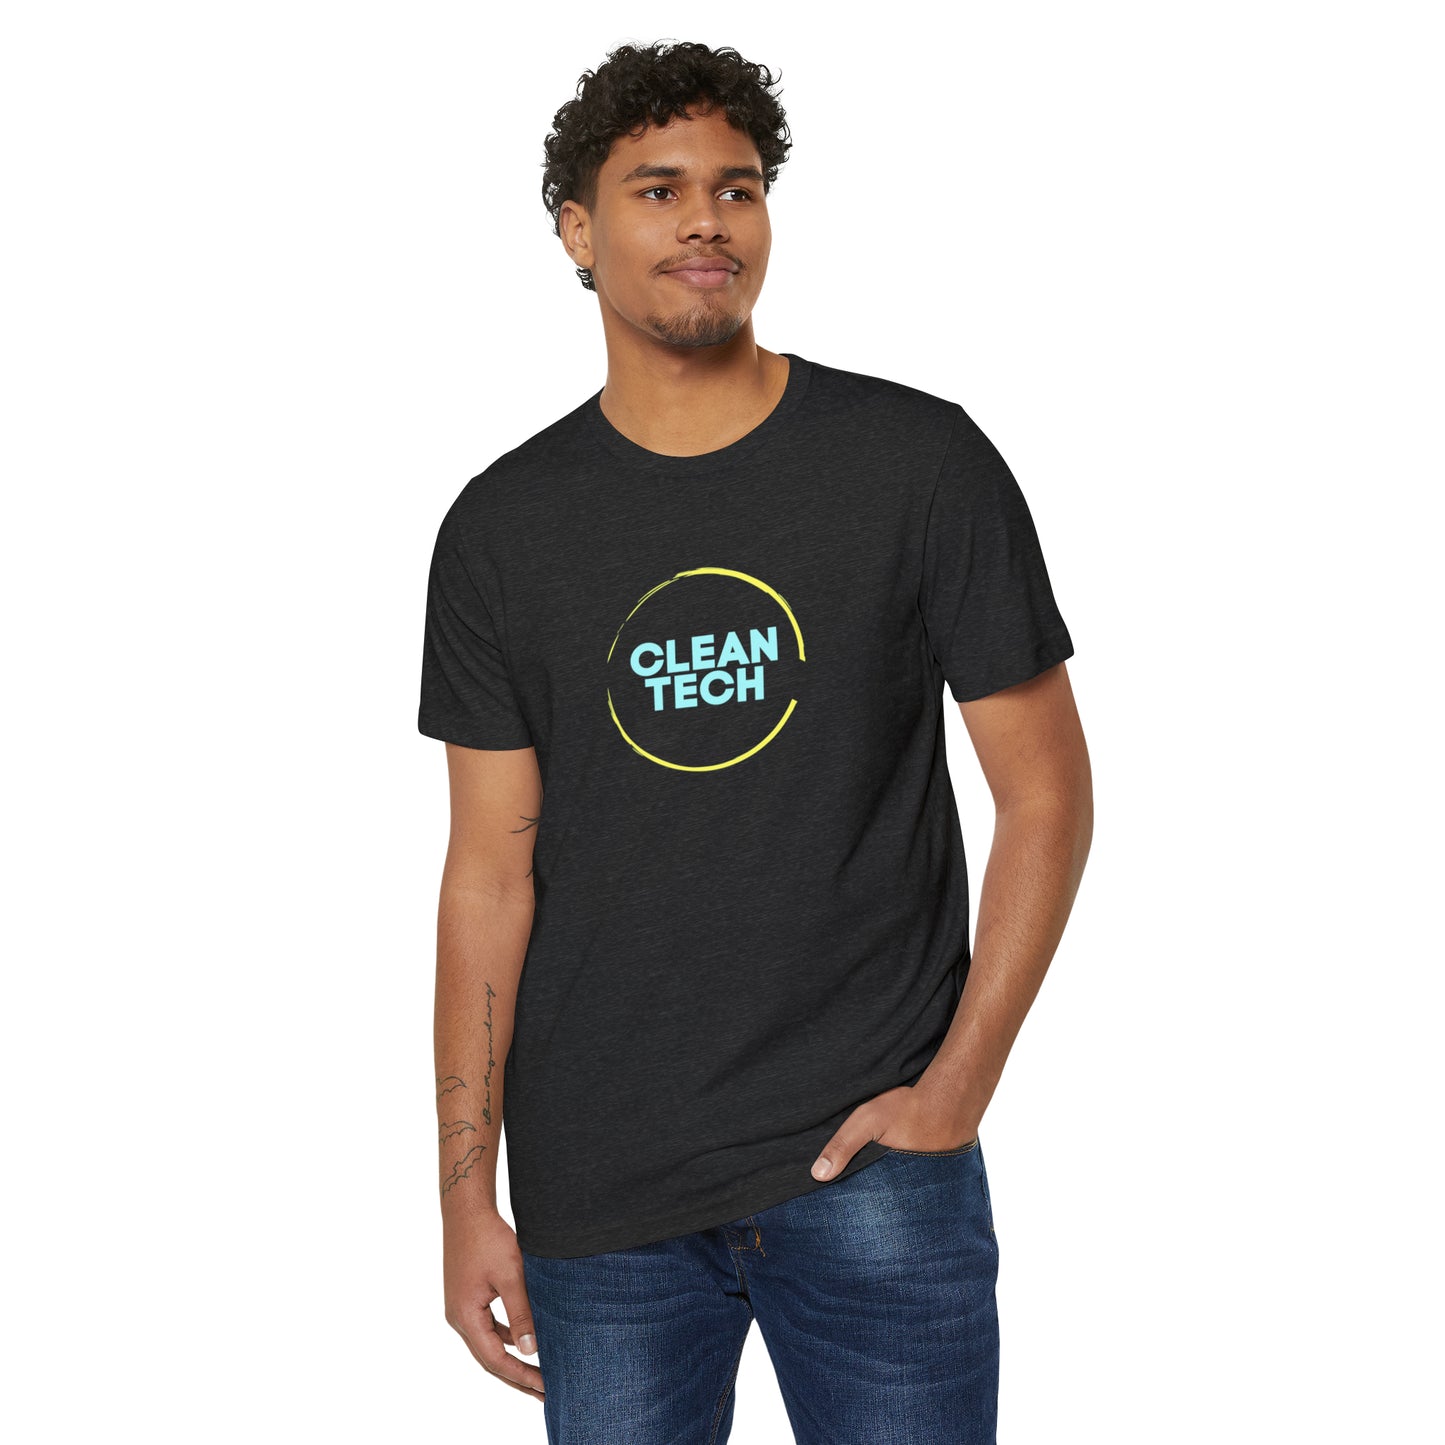 CLEANTECH, Unisex Recycled Organic T-Shirt